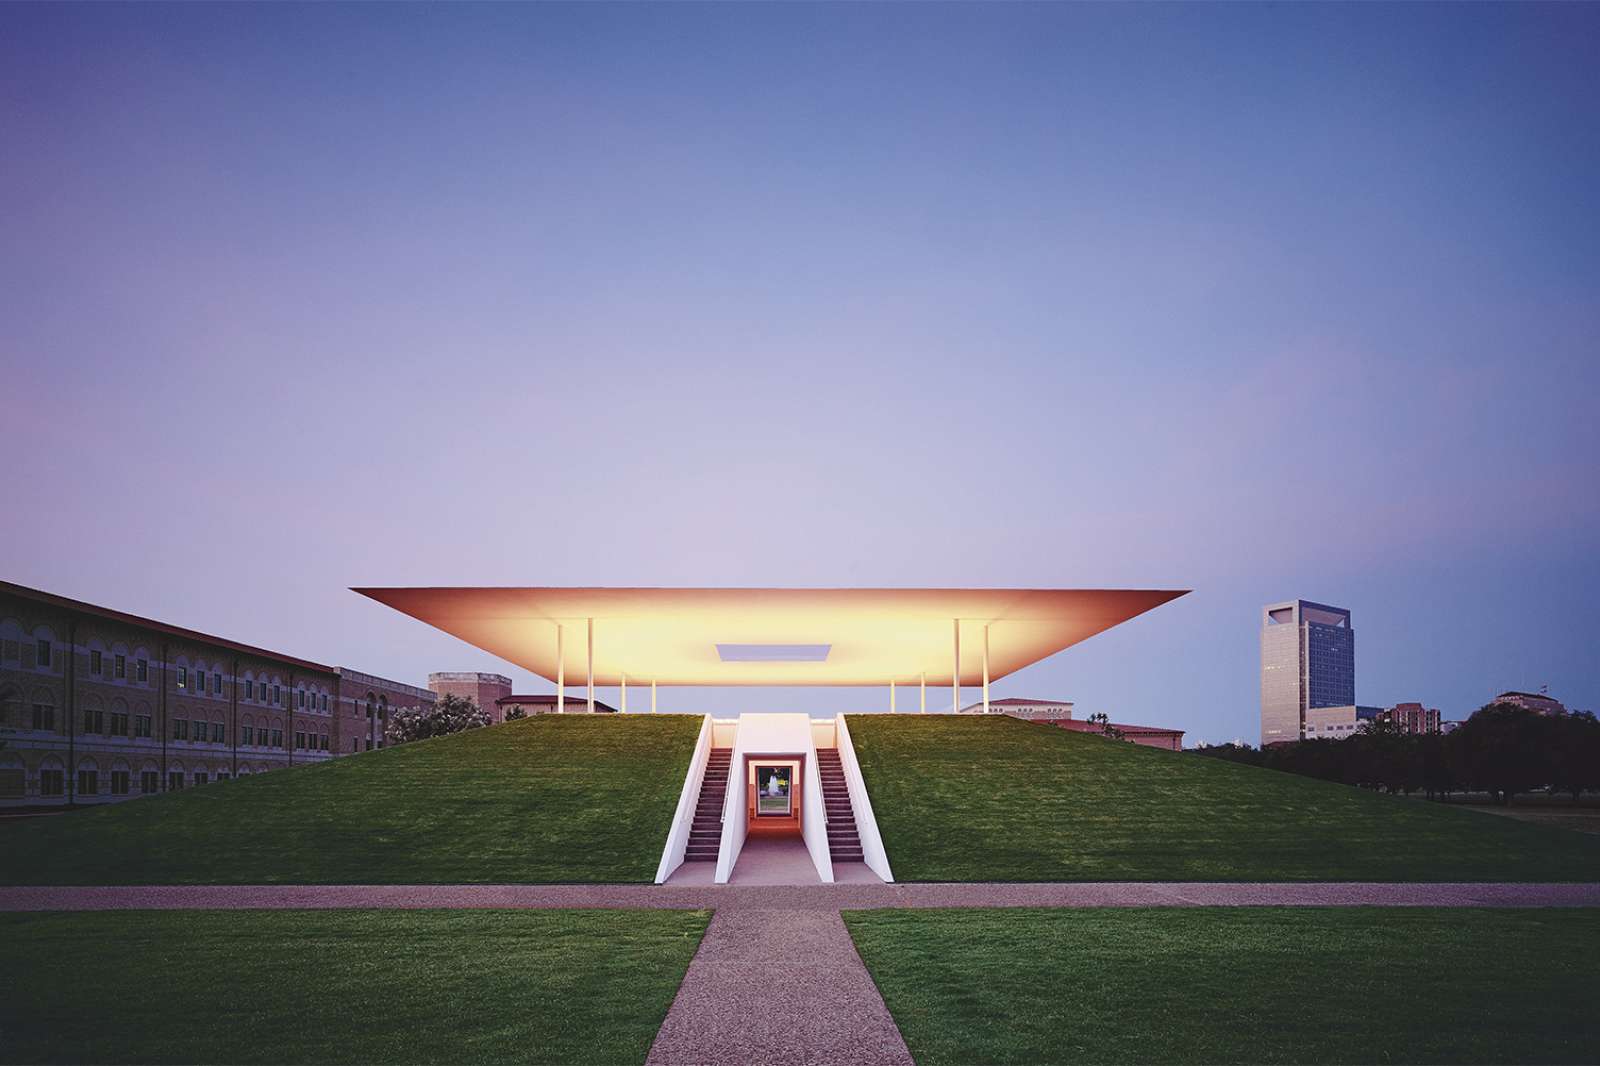 Twilight Epiphany (2012), The James Turrell Skyspace at the Suzanne Deal Booth Centennial Pavilion at Rice University. Photo: Florian Holzherr. Image courtesy Rice University. 